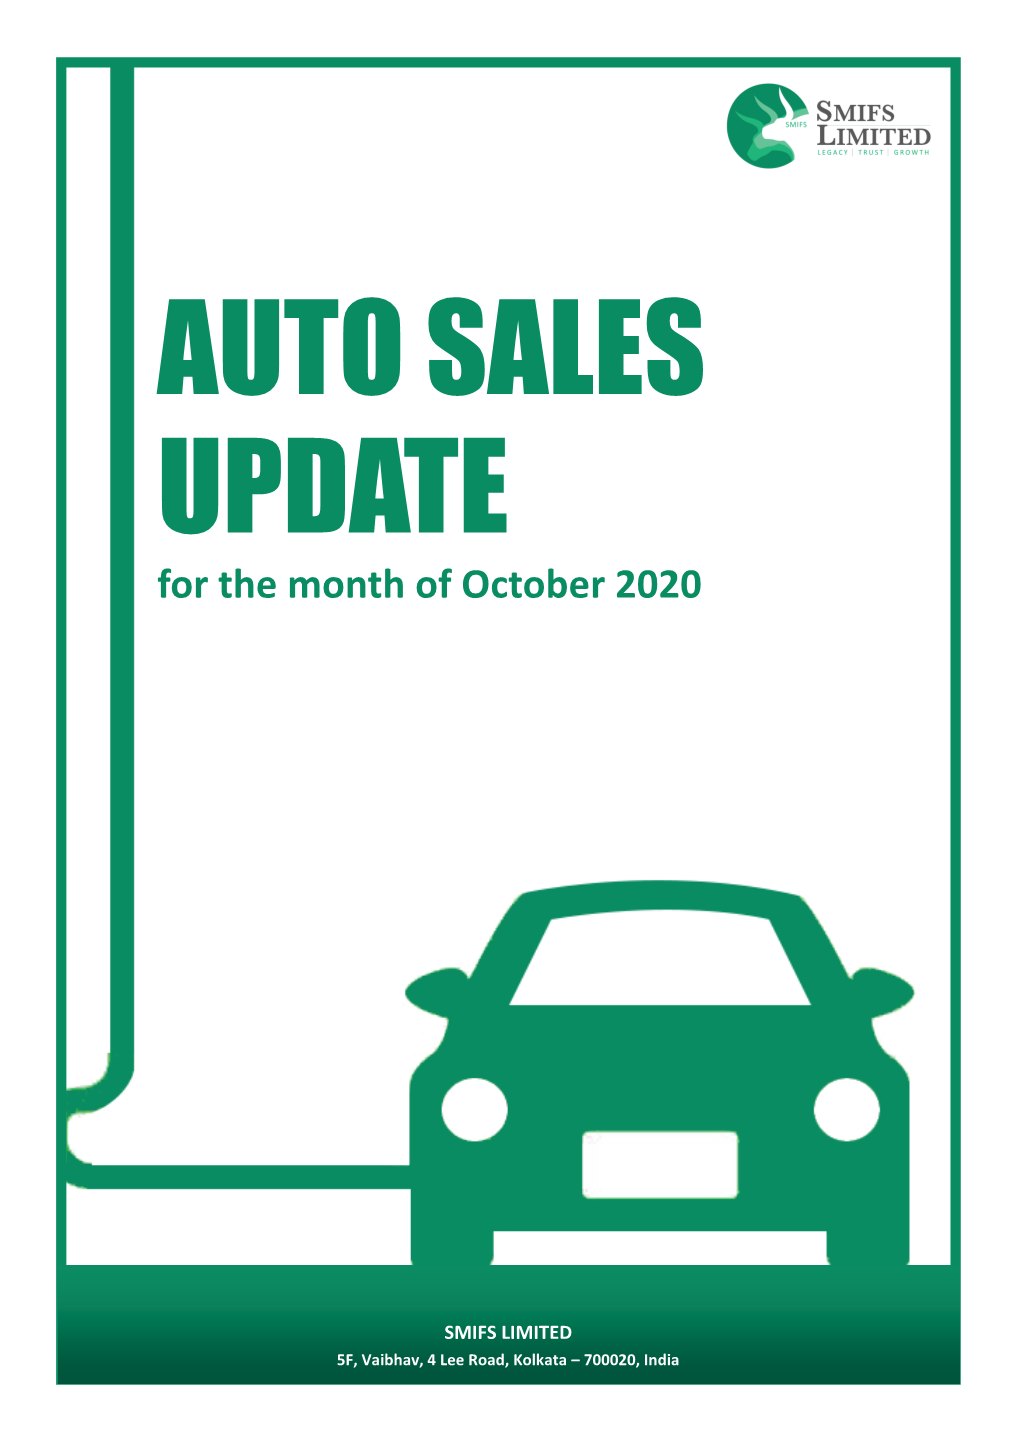 Auto Sales Update for October 2020